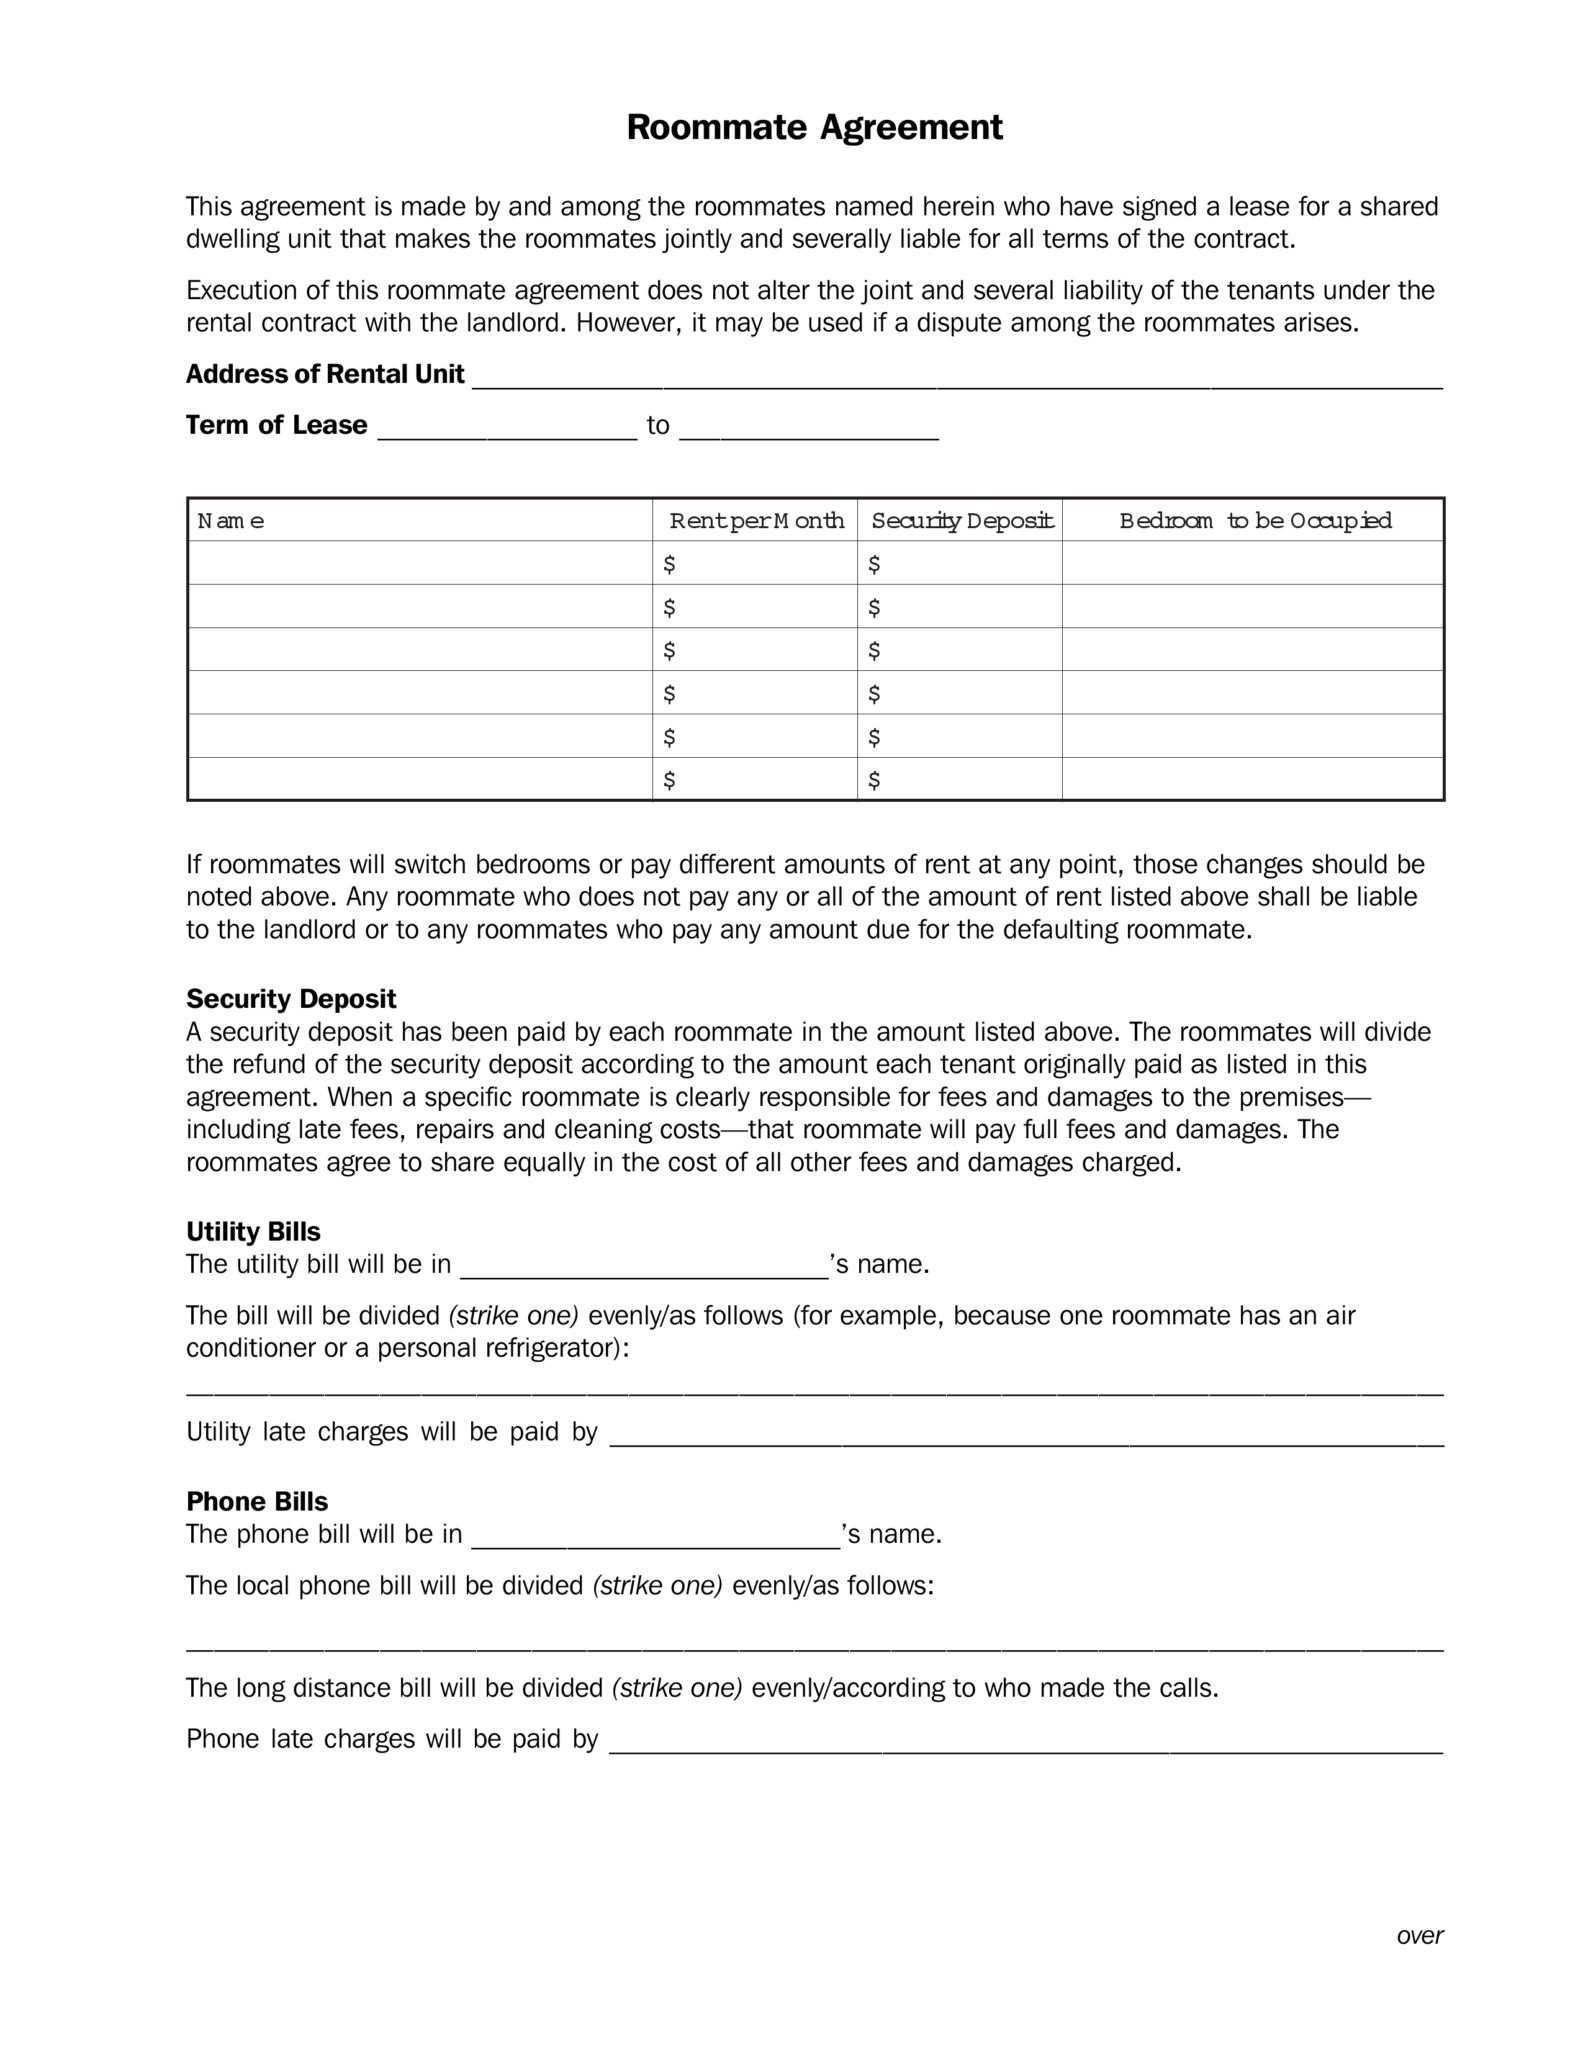 Free Printable Roommate Agreement - Printable Agreements Within Security Deposit Agreement Between Roommates For Security Deposit Agreement Between Roommates